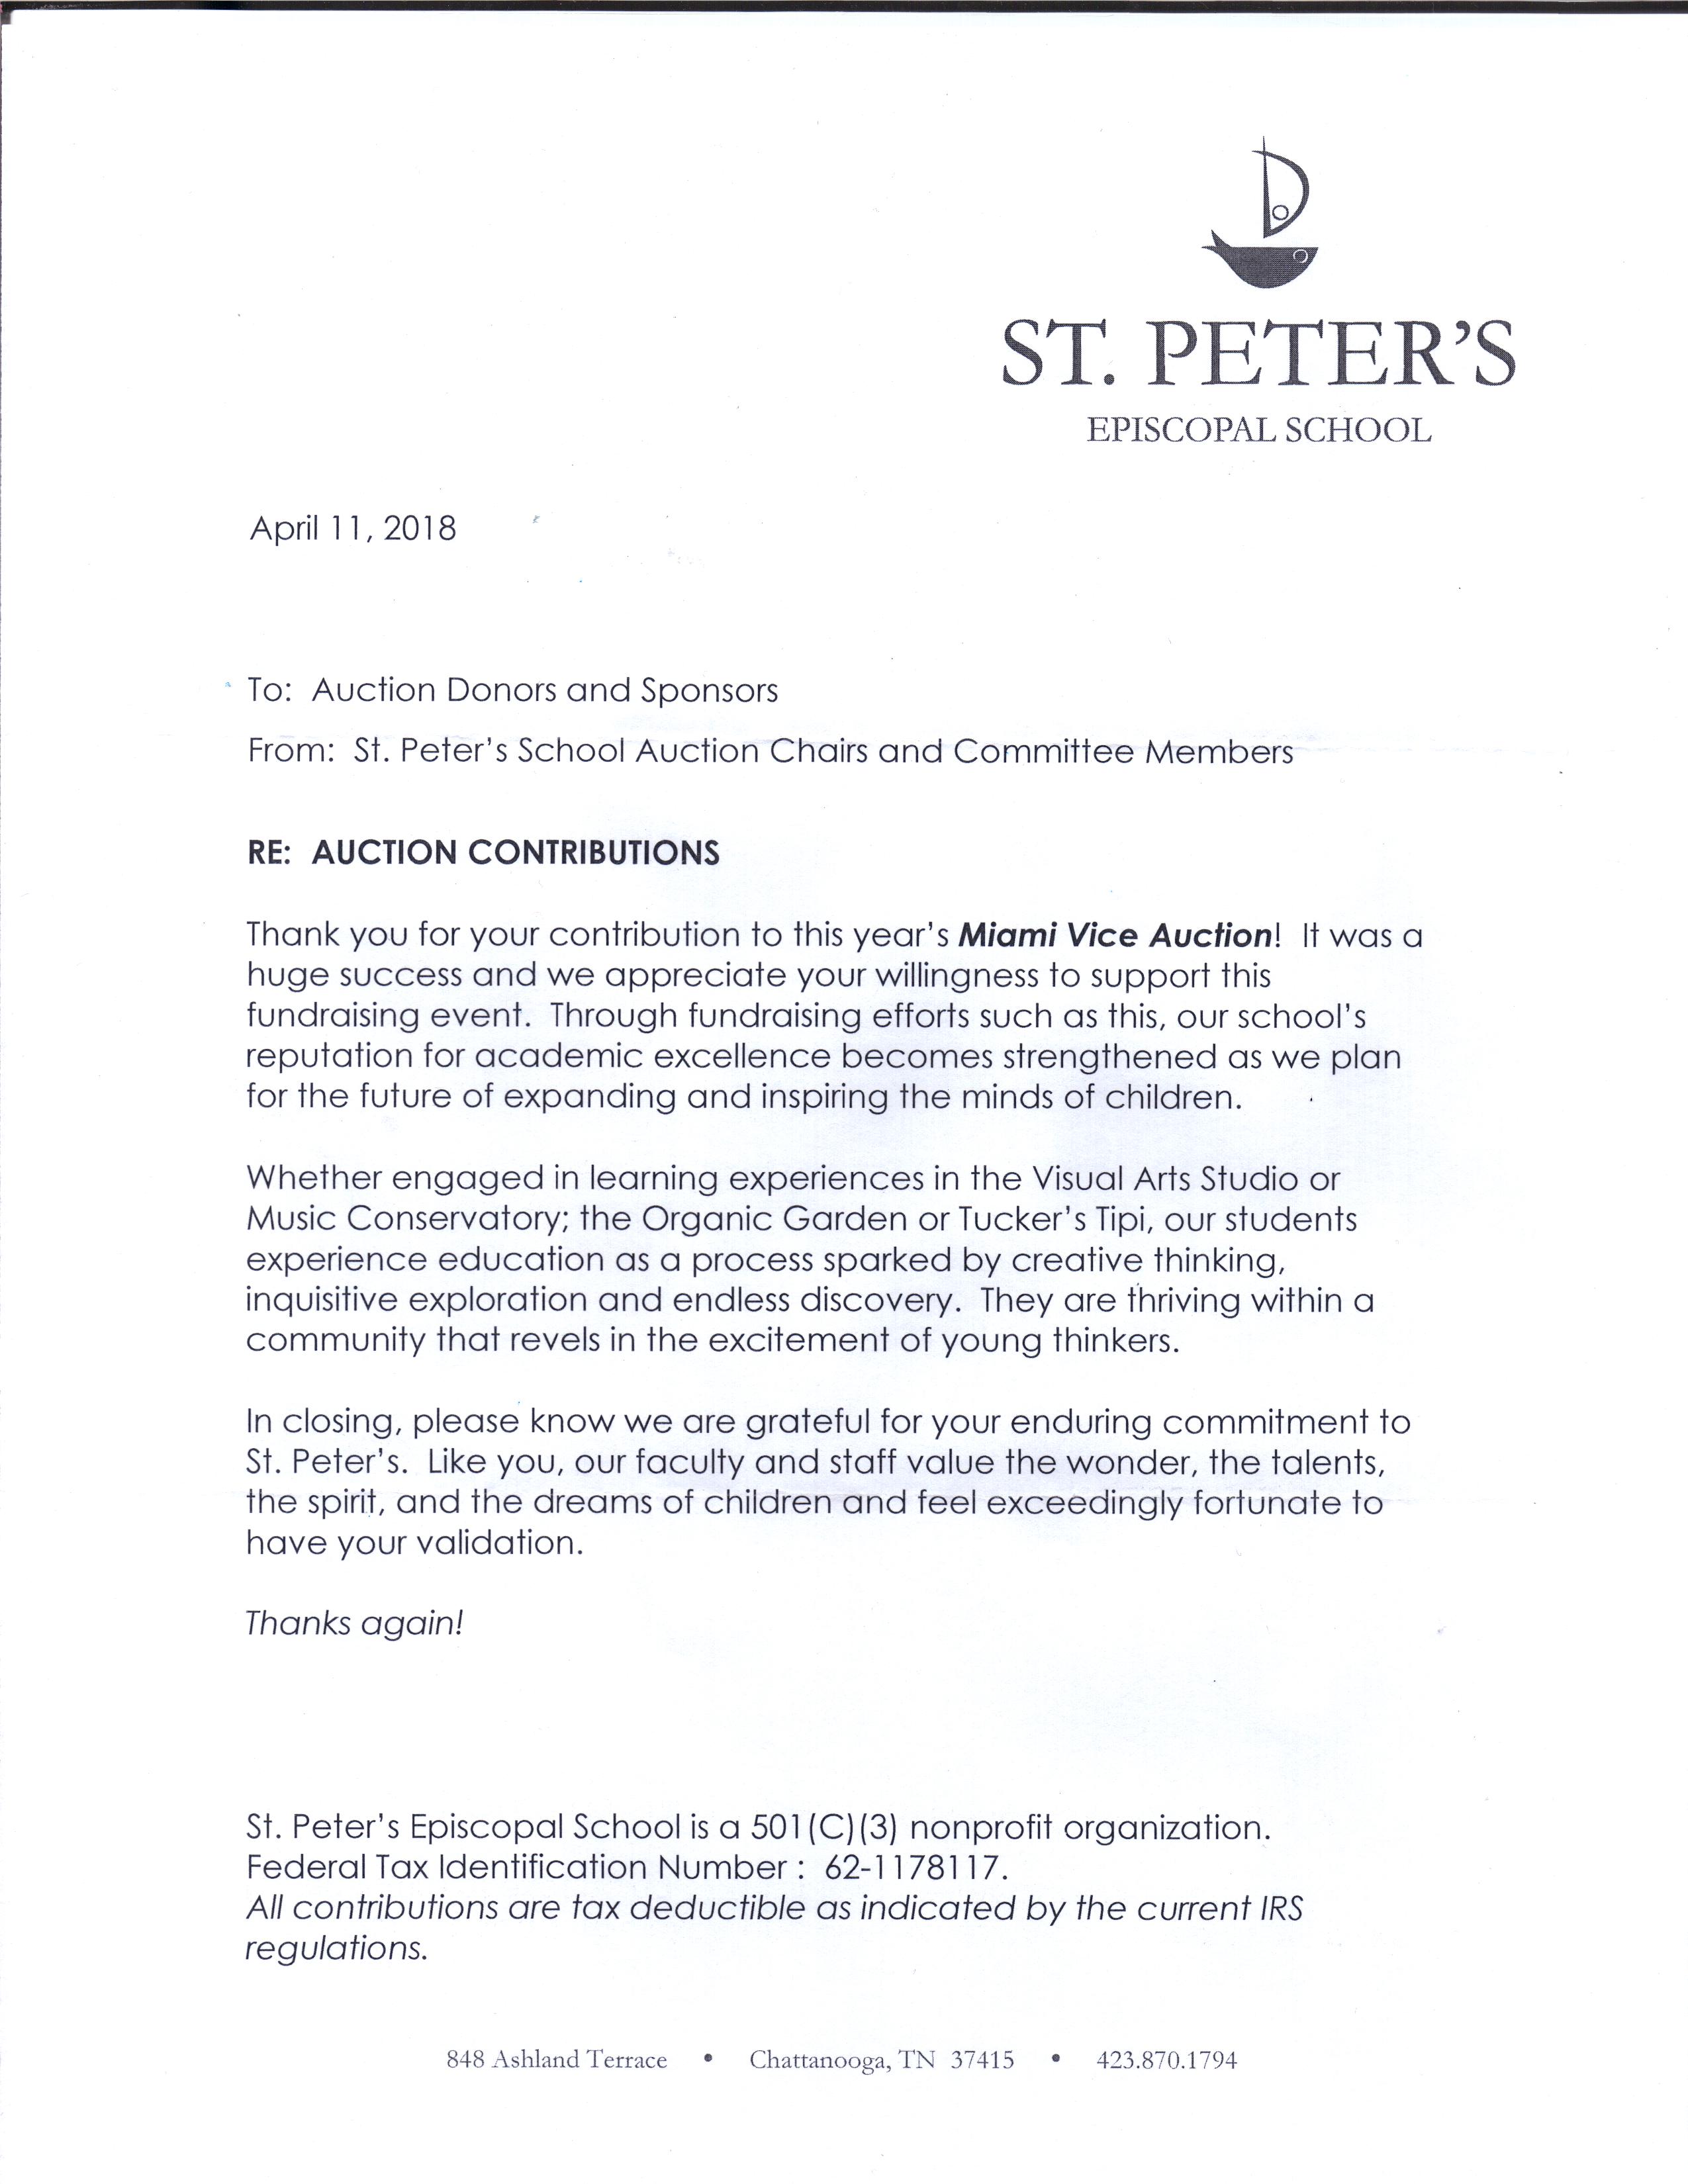 St. Peters Contribution Letter